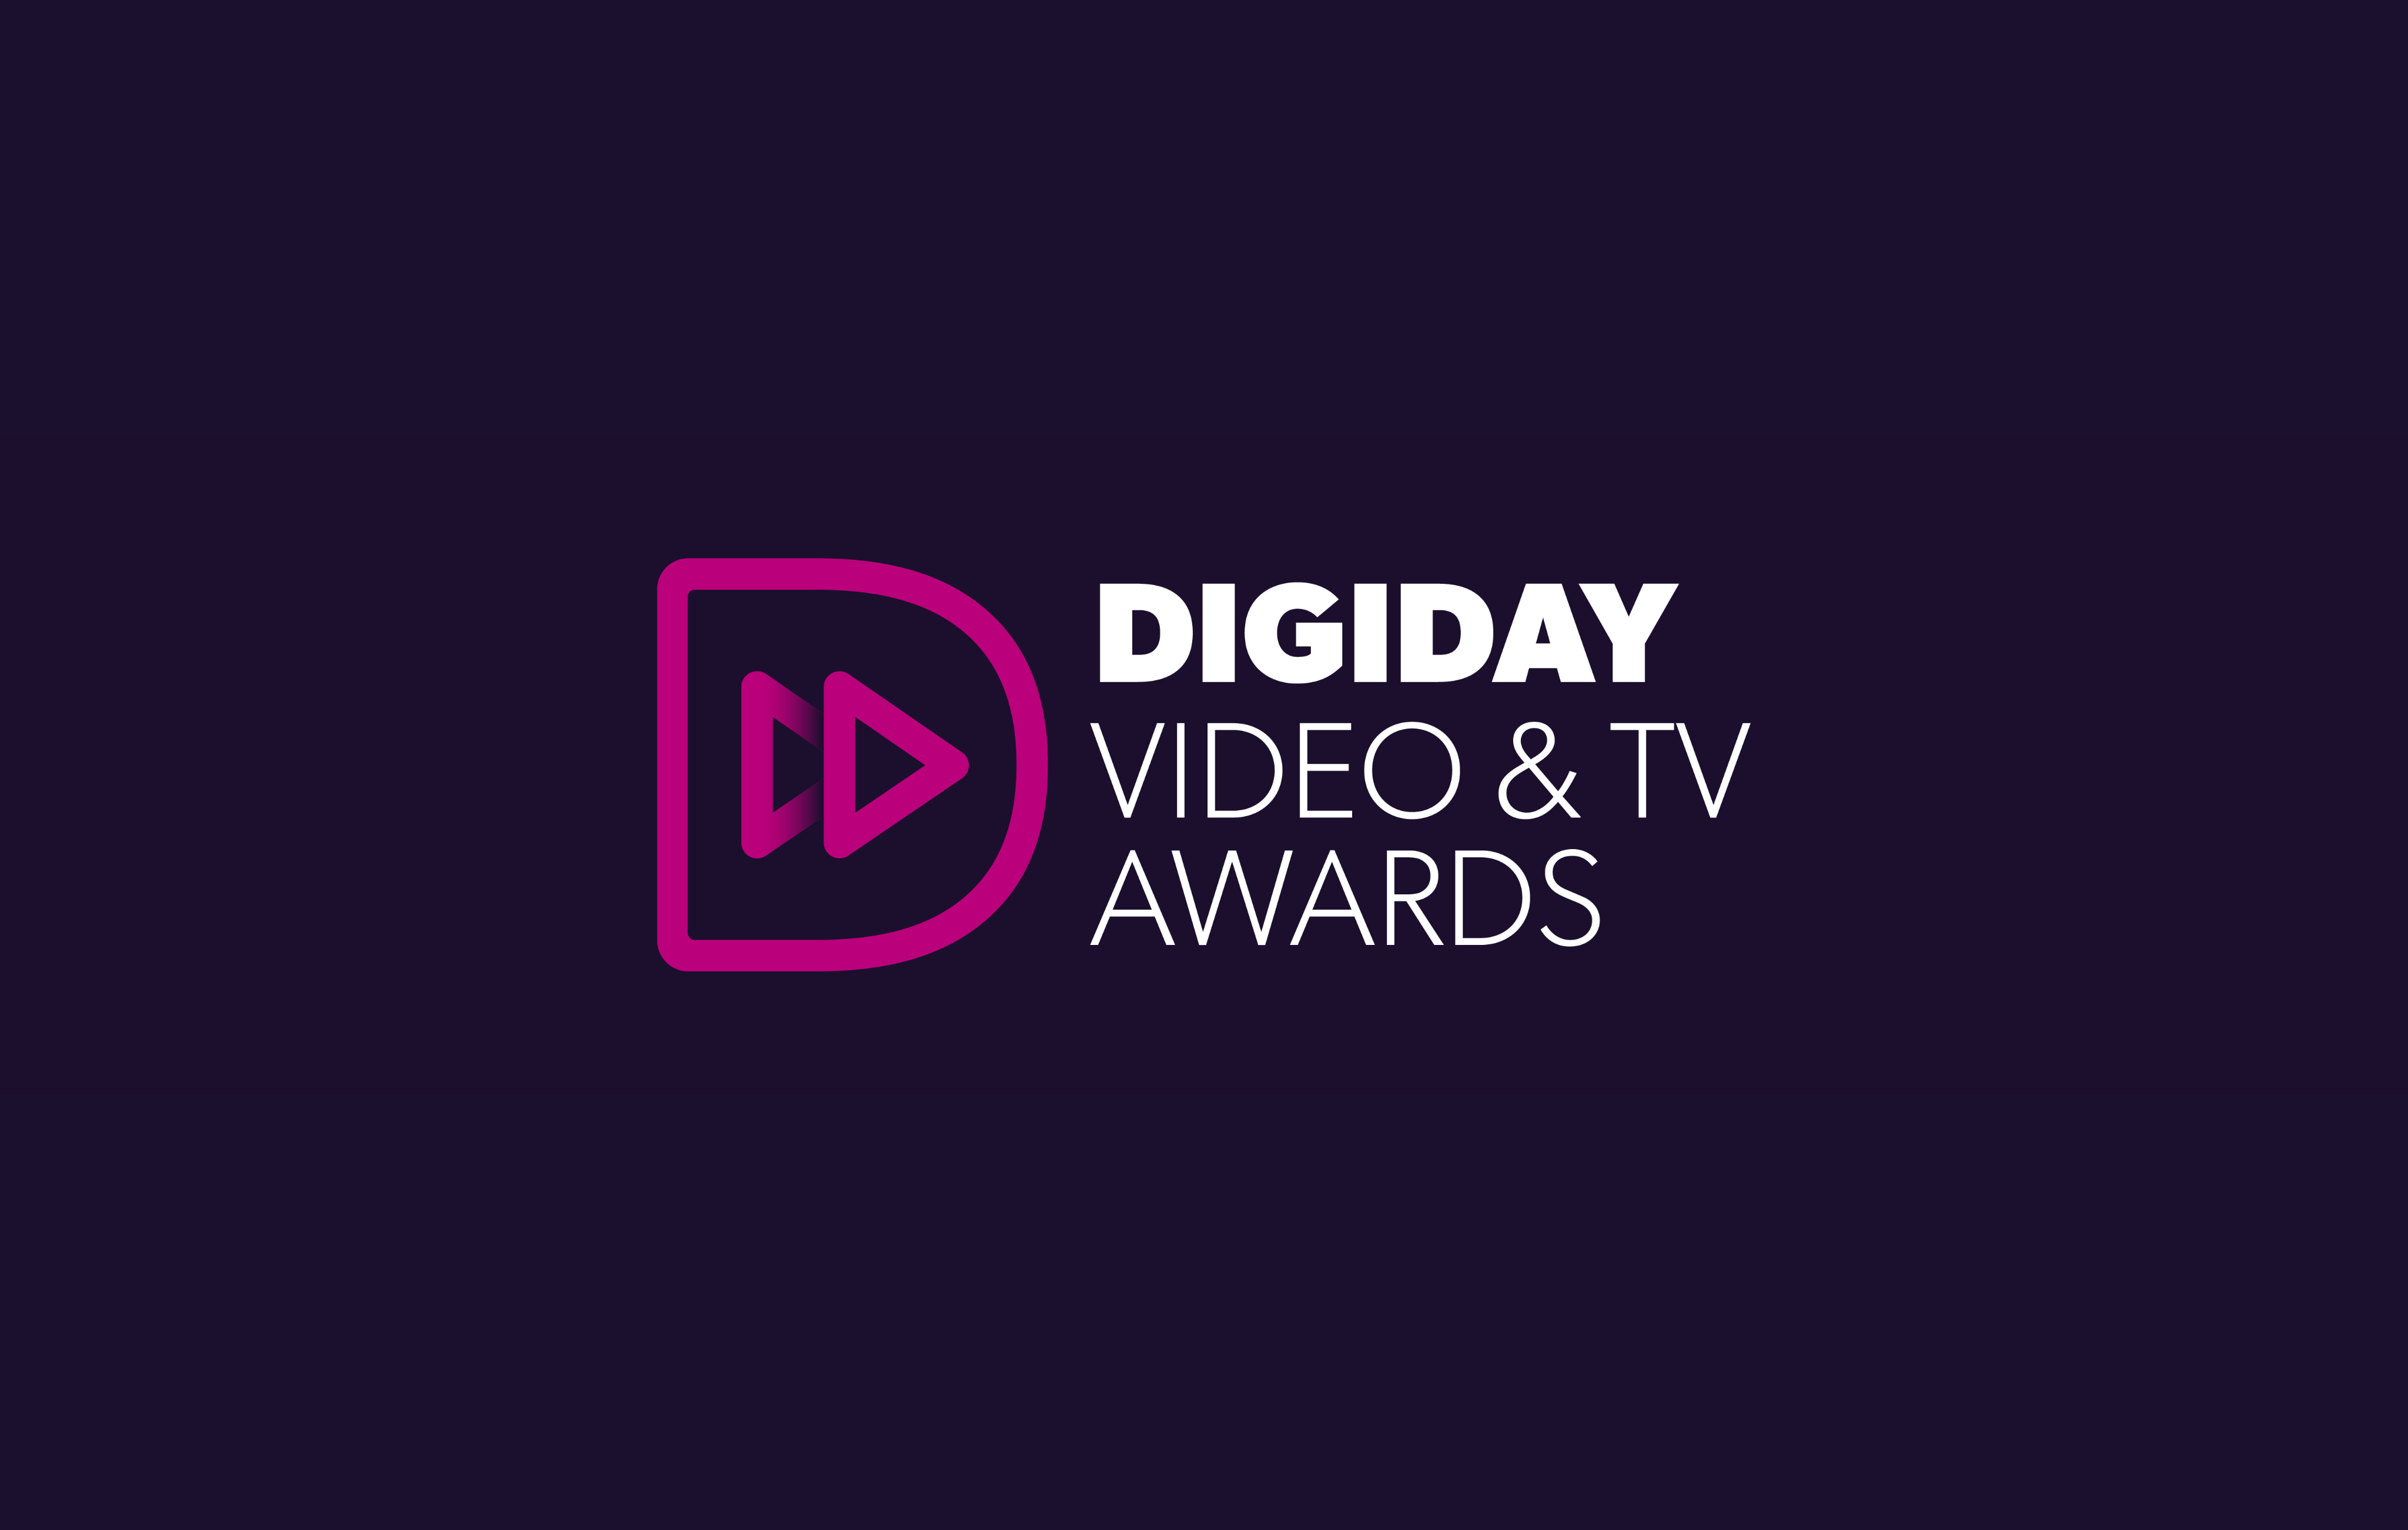 Barkley, MiQ & iProspect, PinkNews, Chewy and NBC News Custom Productions are among this year’s Digiday Video and TV Awards shortlist nominees - Digiday